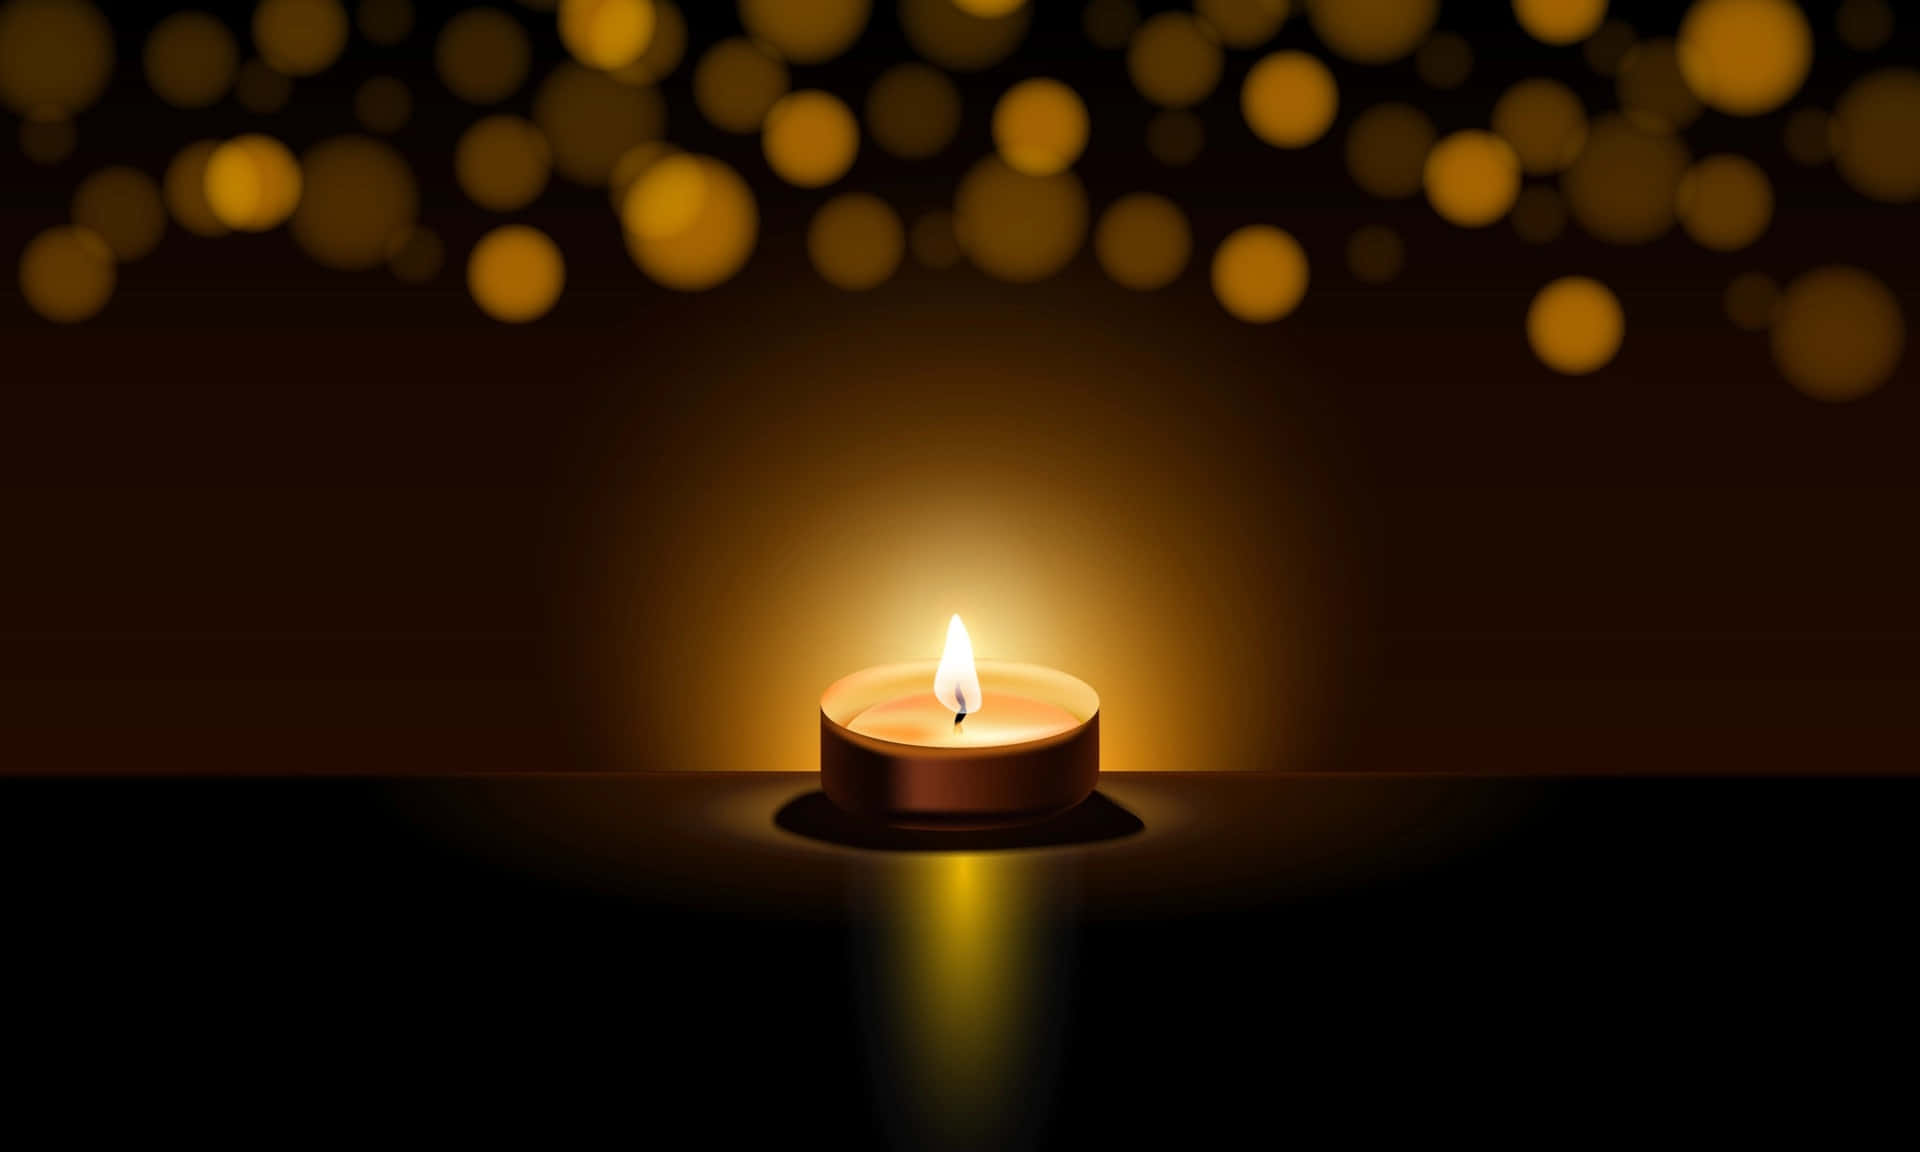 A Candle On A Dark Background With Golden Bokeh